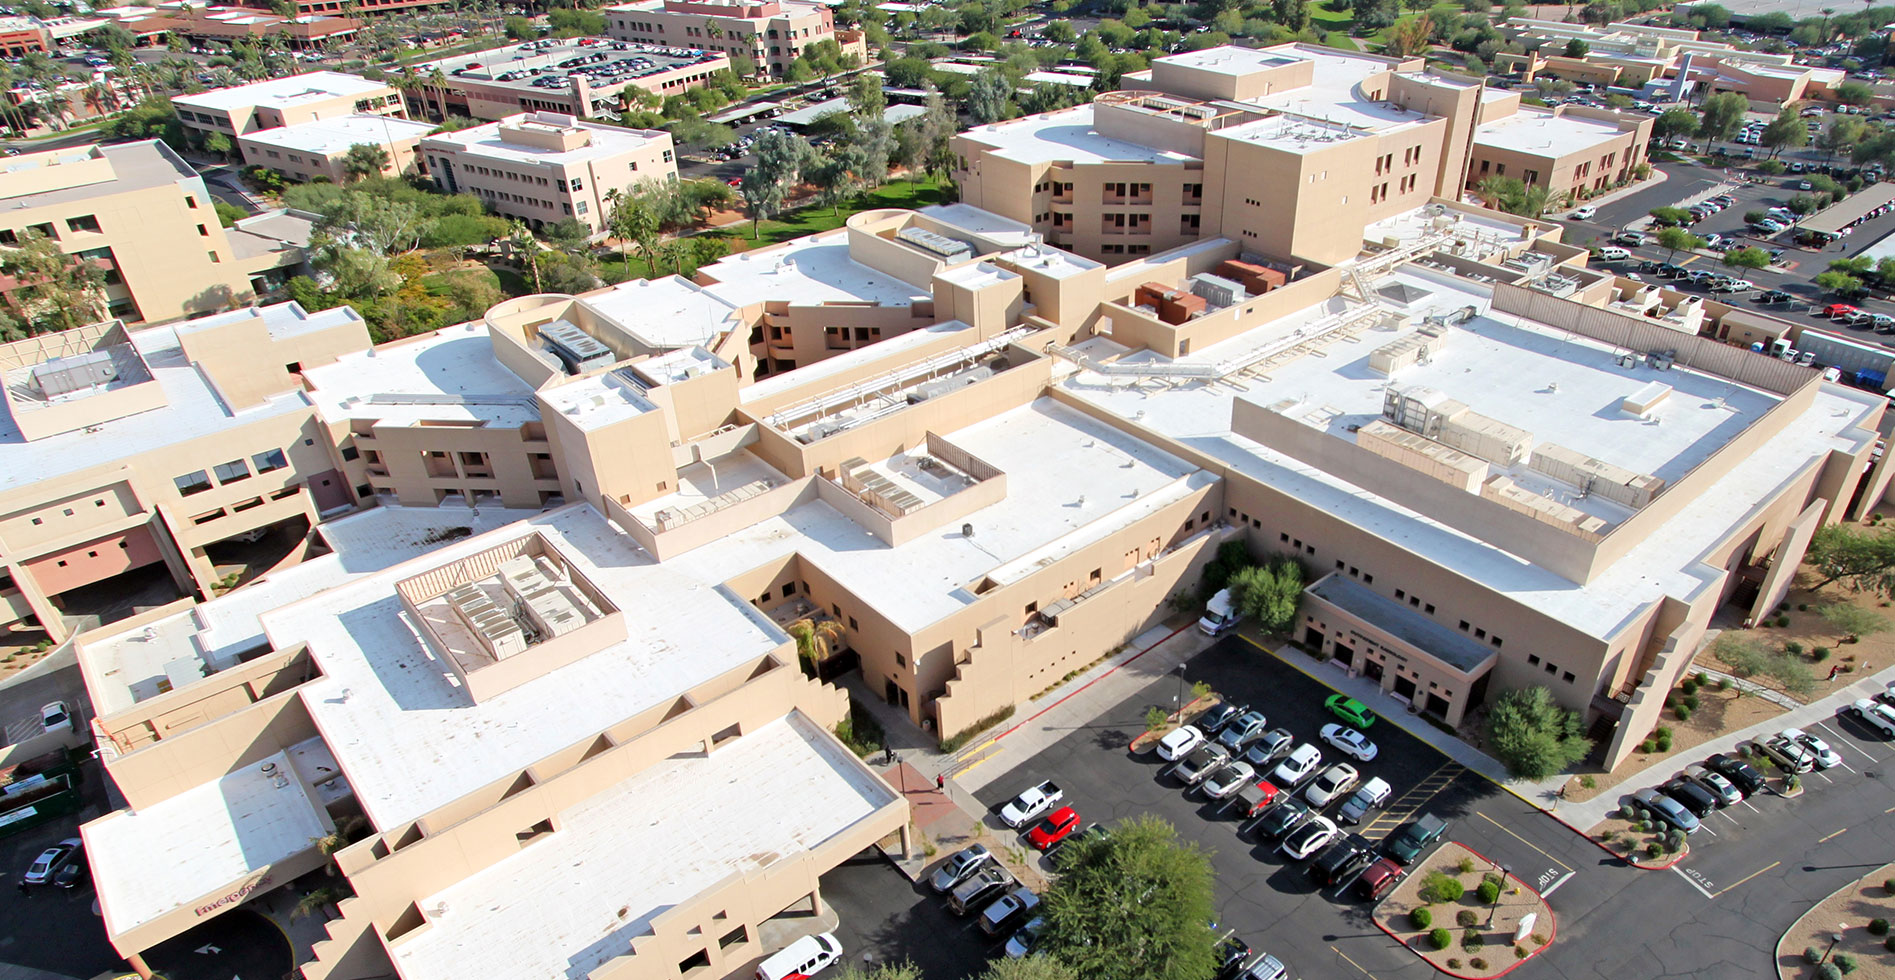 SPF commercial roof installation by CentiMark on a hospital